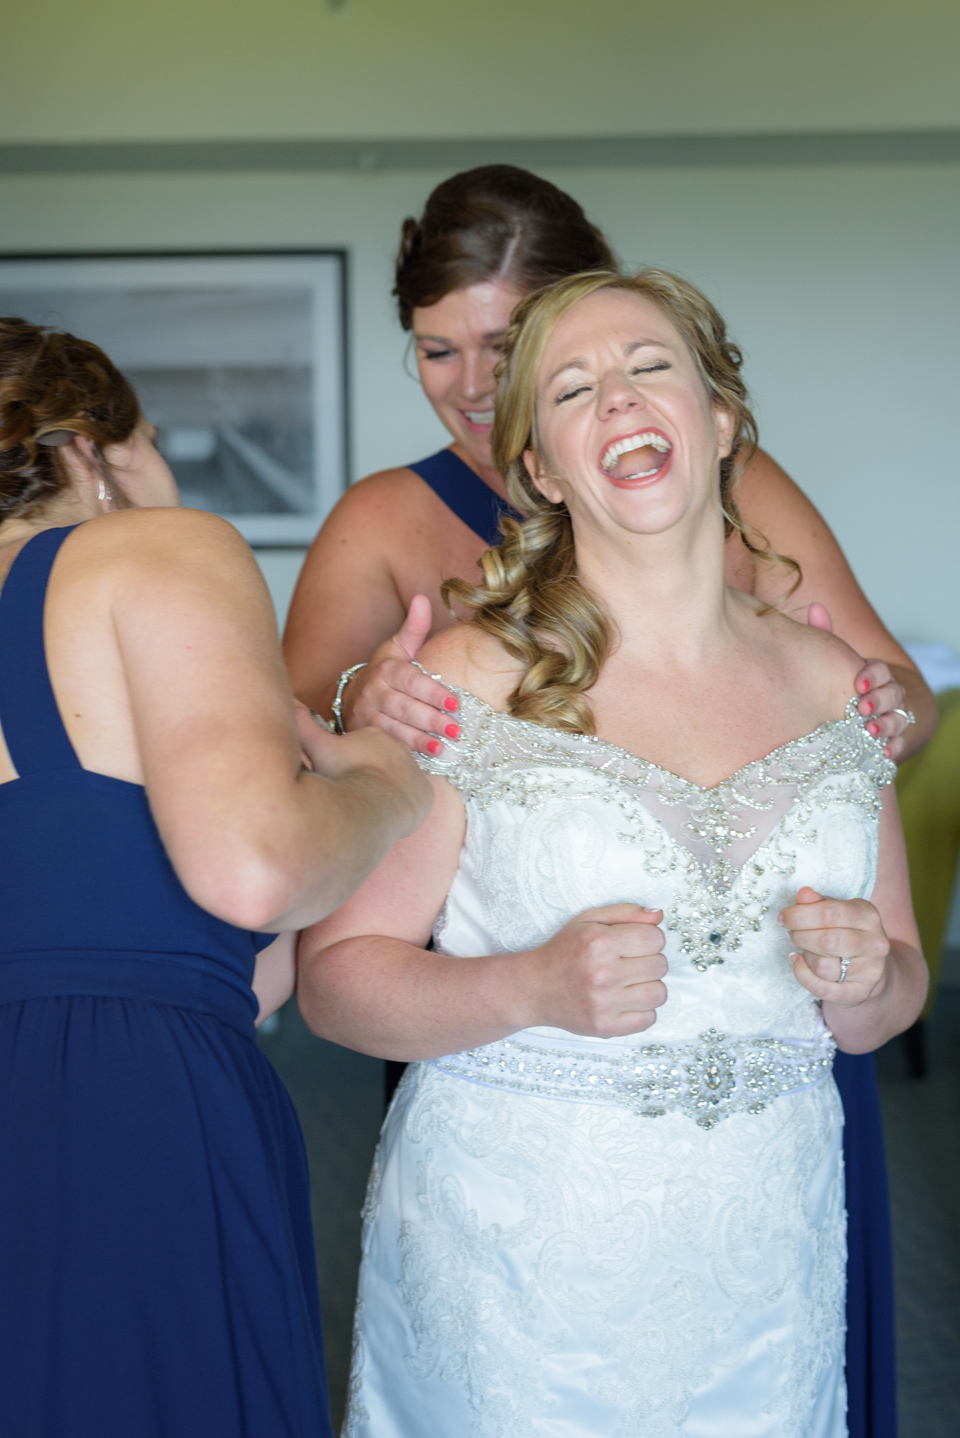 bride bursts out laughing as her bridesmaids glue on her wedding dress